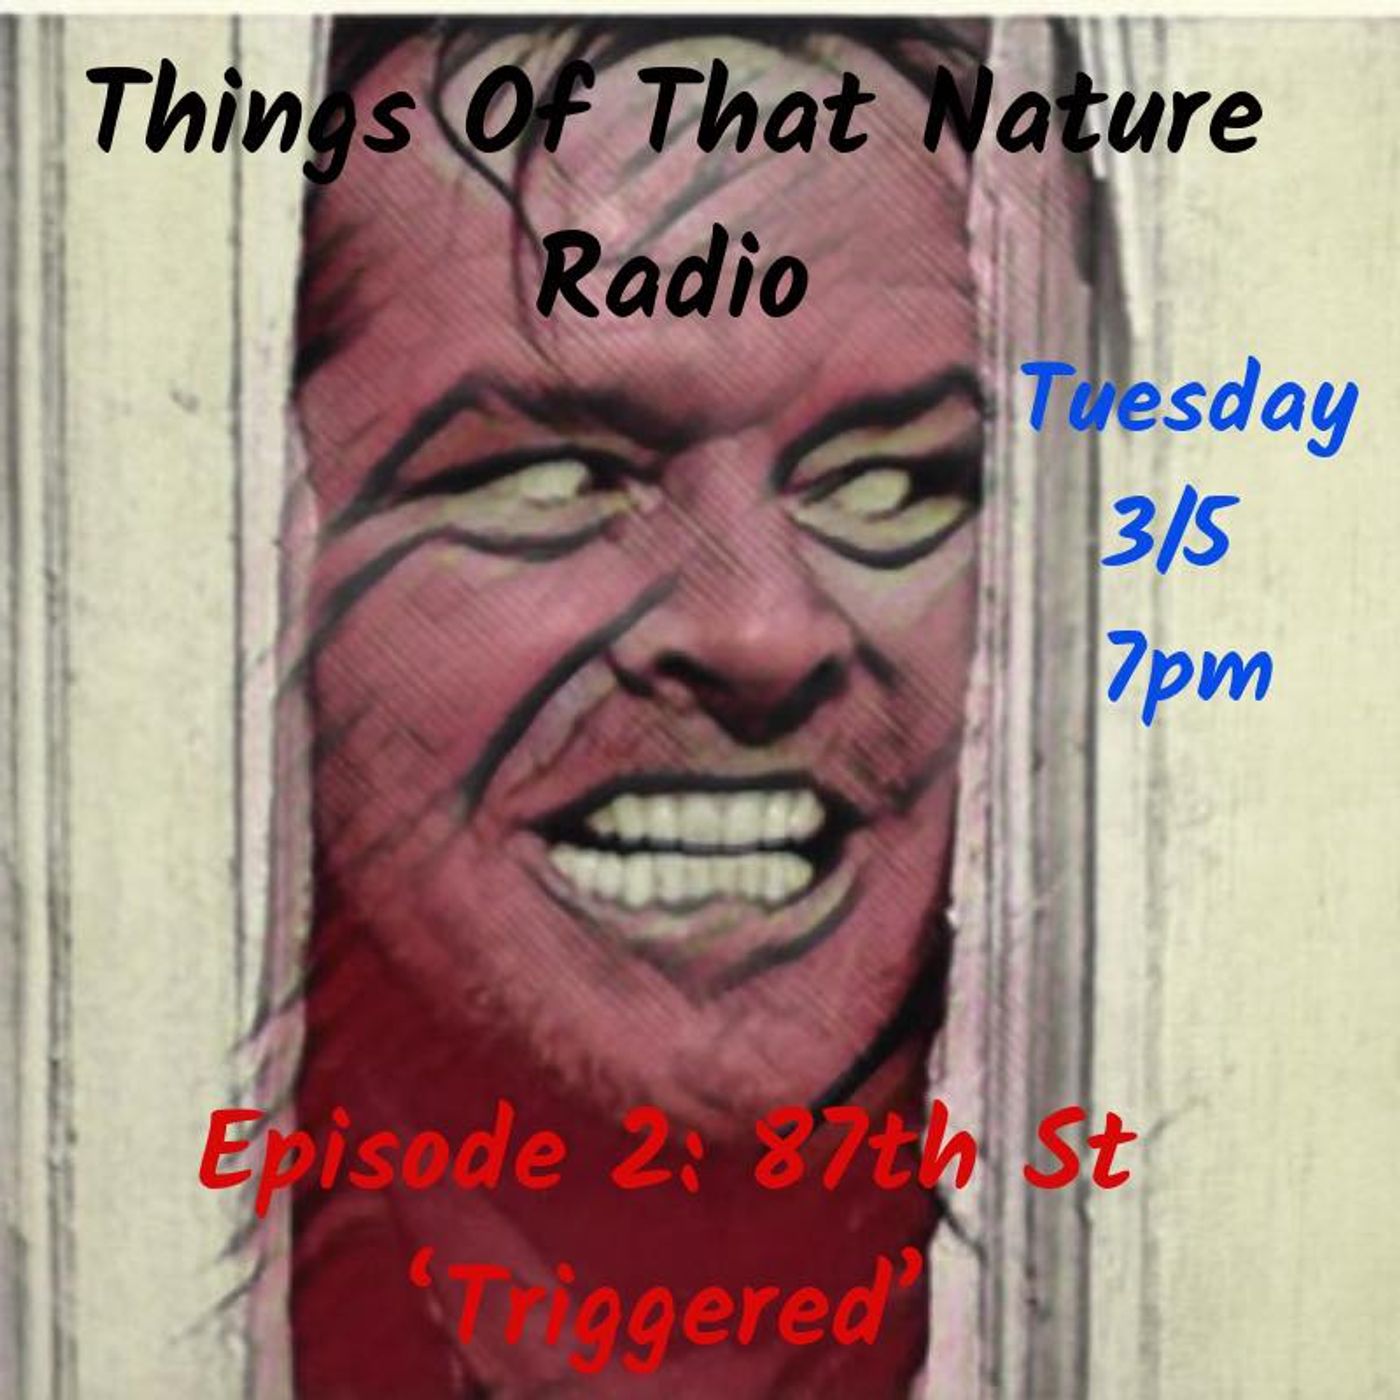 Episode #2 | 87th Street - “Triggered"